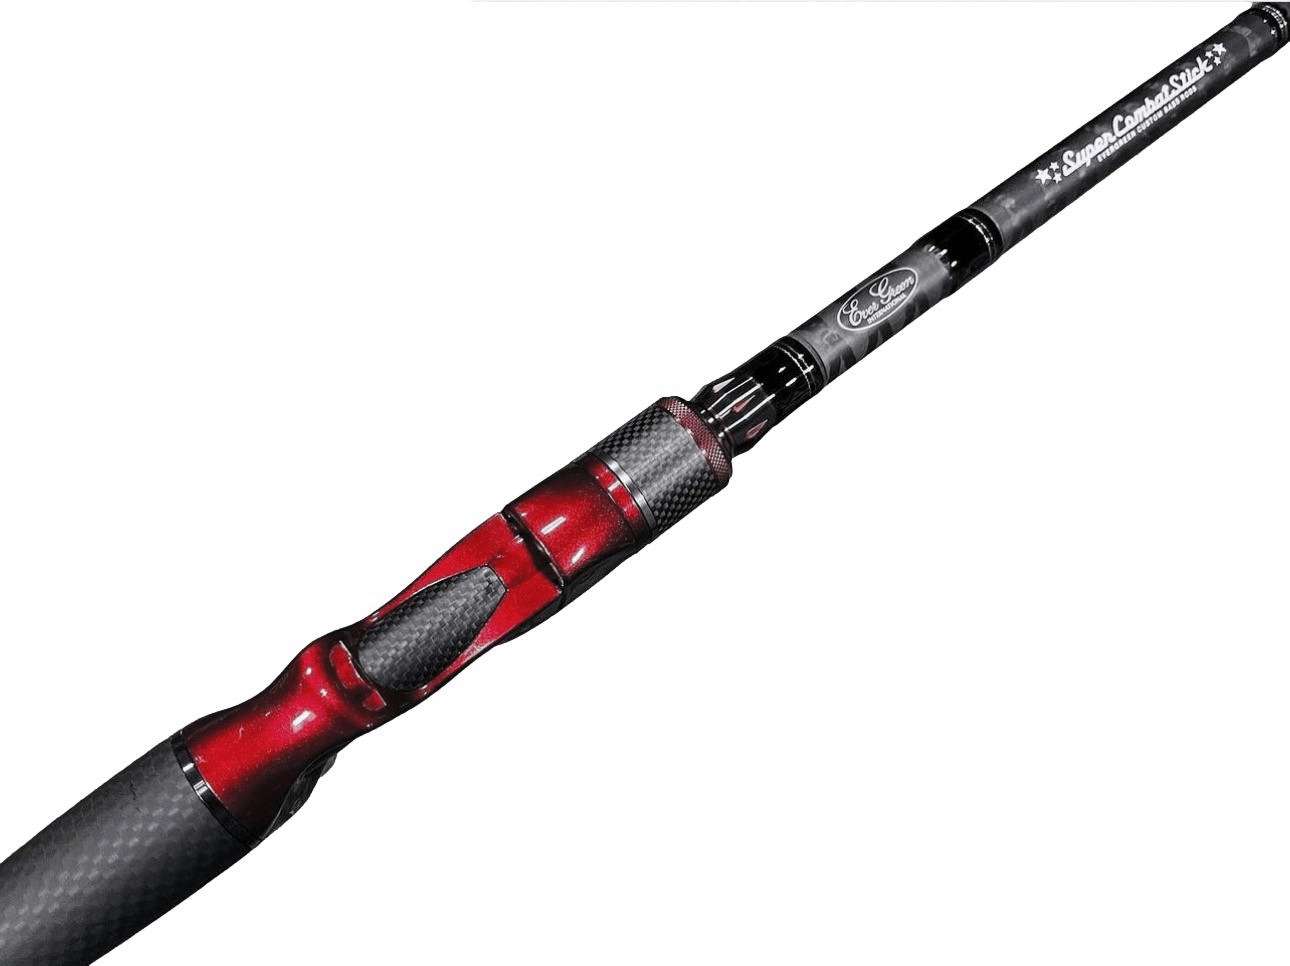 Is This The ULTIMATE Chatterbait Rod?? The New Evergreen Super Combat  Stick!! 